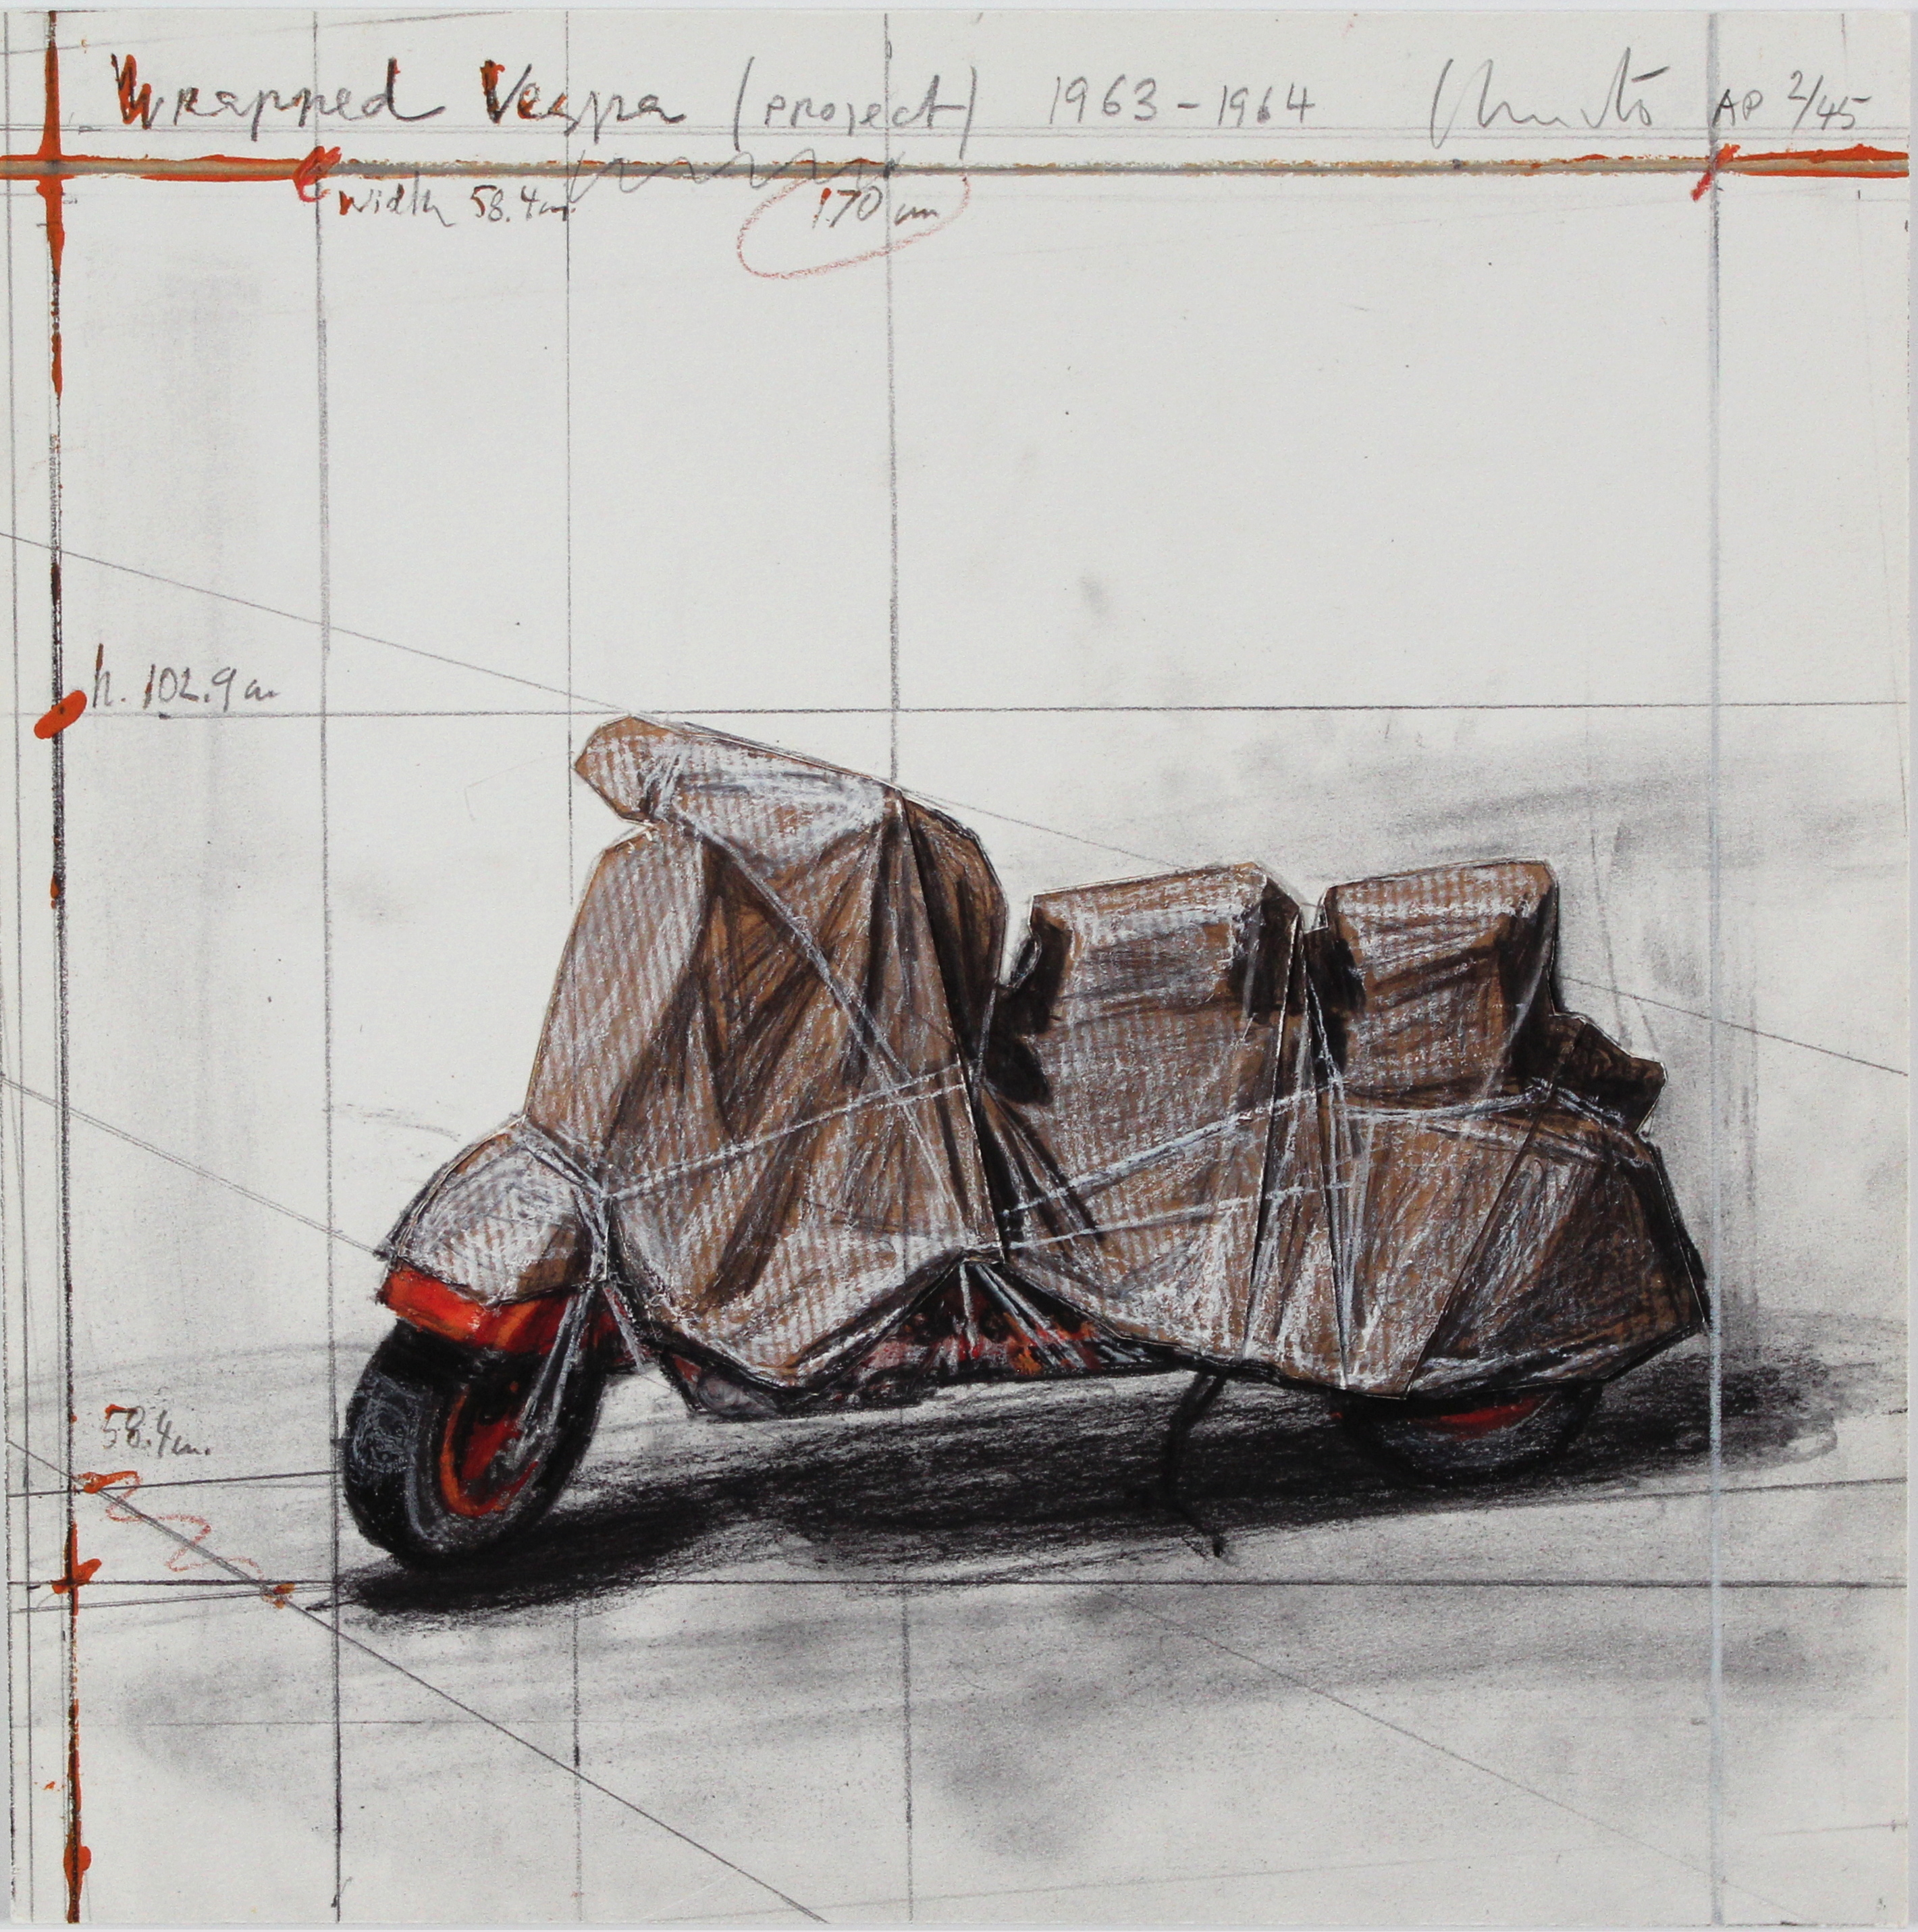 Wrapped Vespa, Project, 1963-64